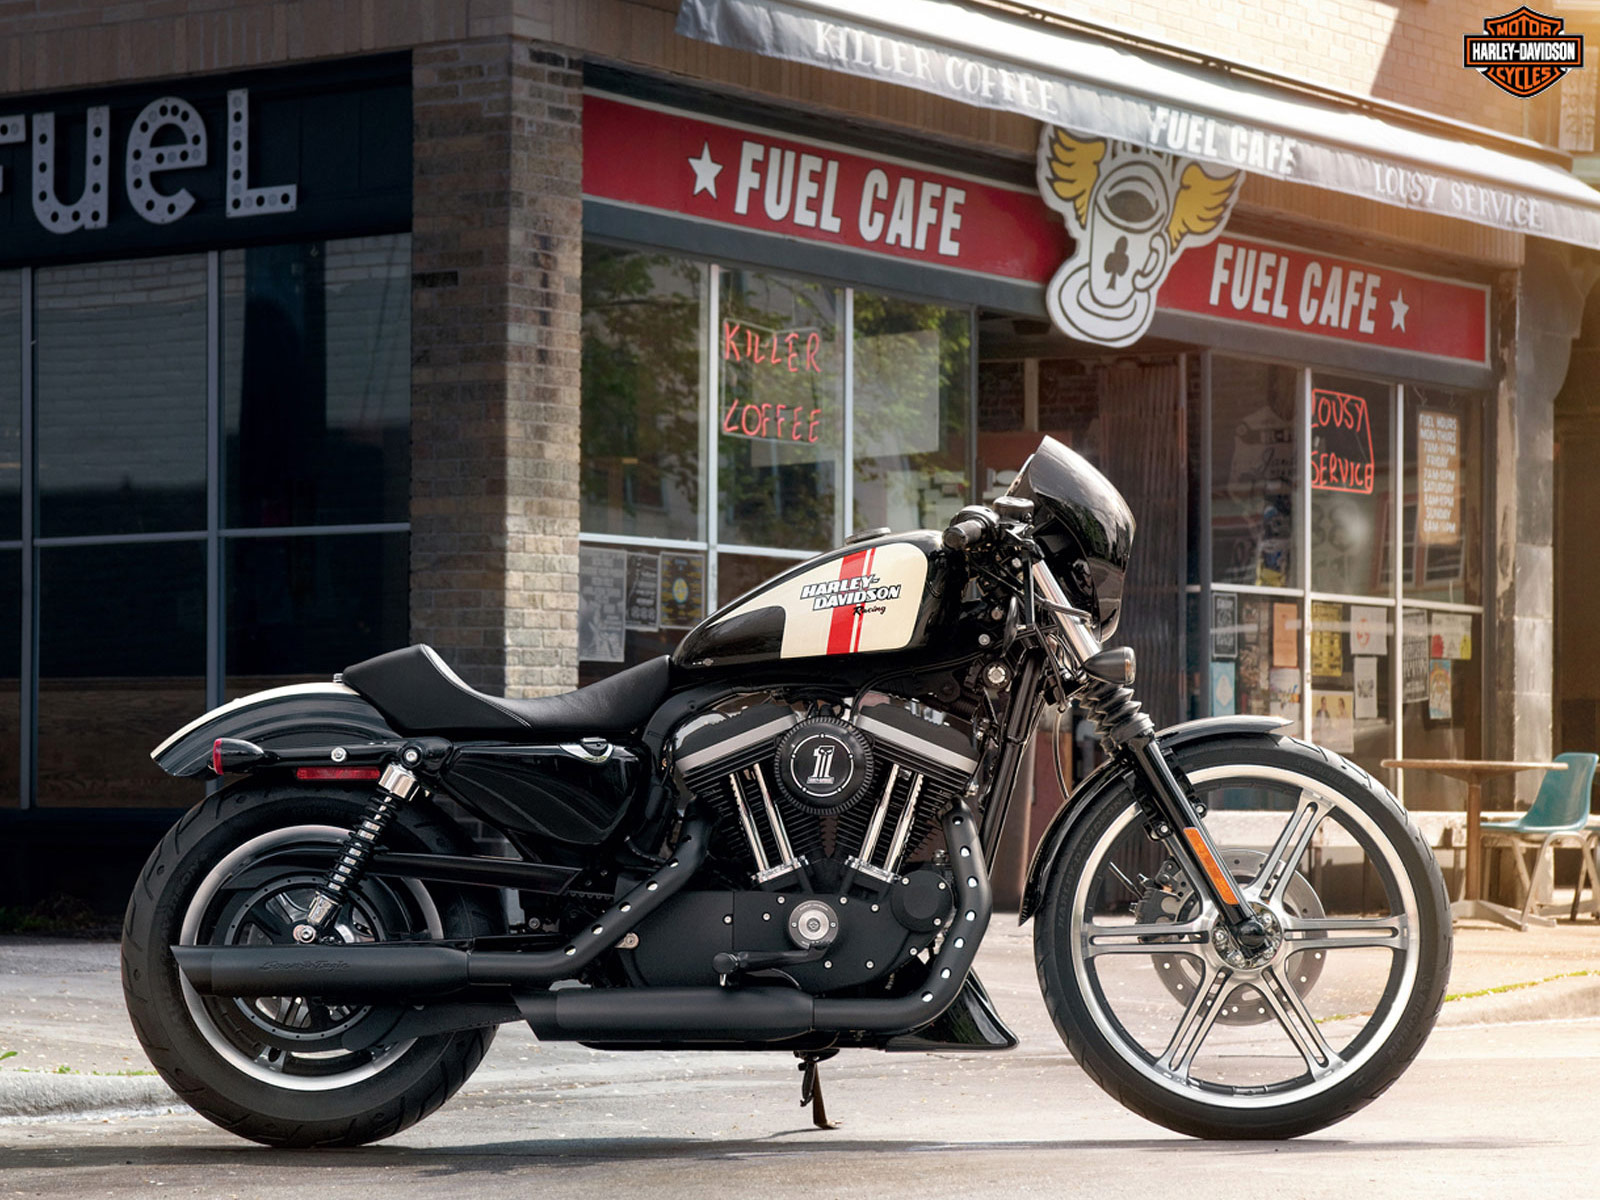 2013 XL883N Iron 883 Harley Davidson Pictures Specifications